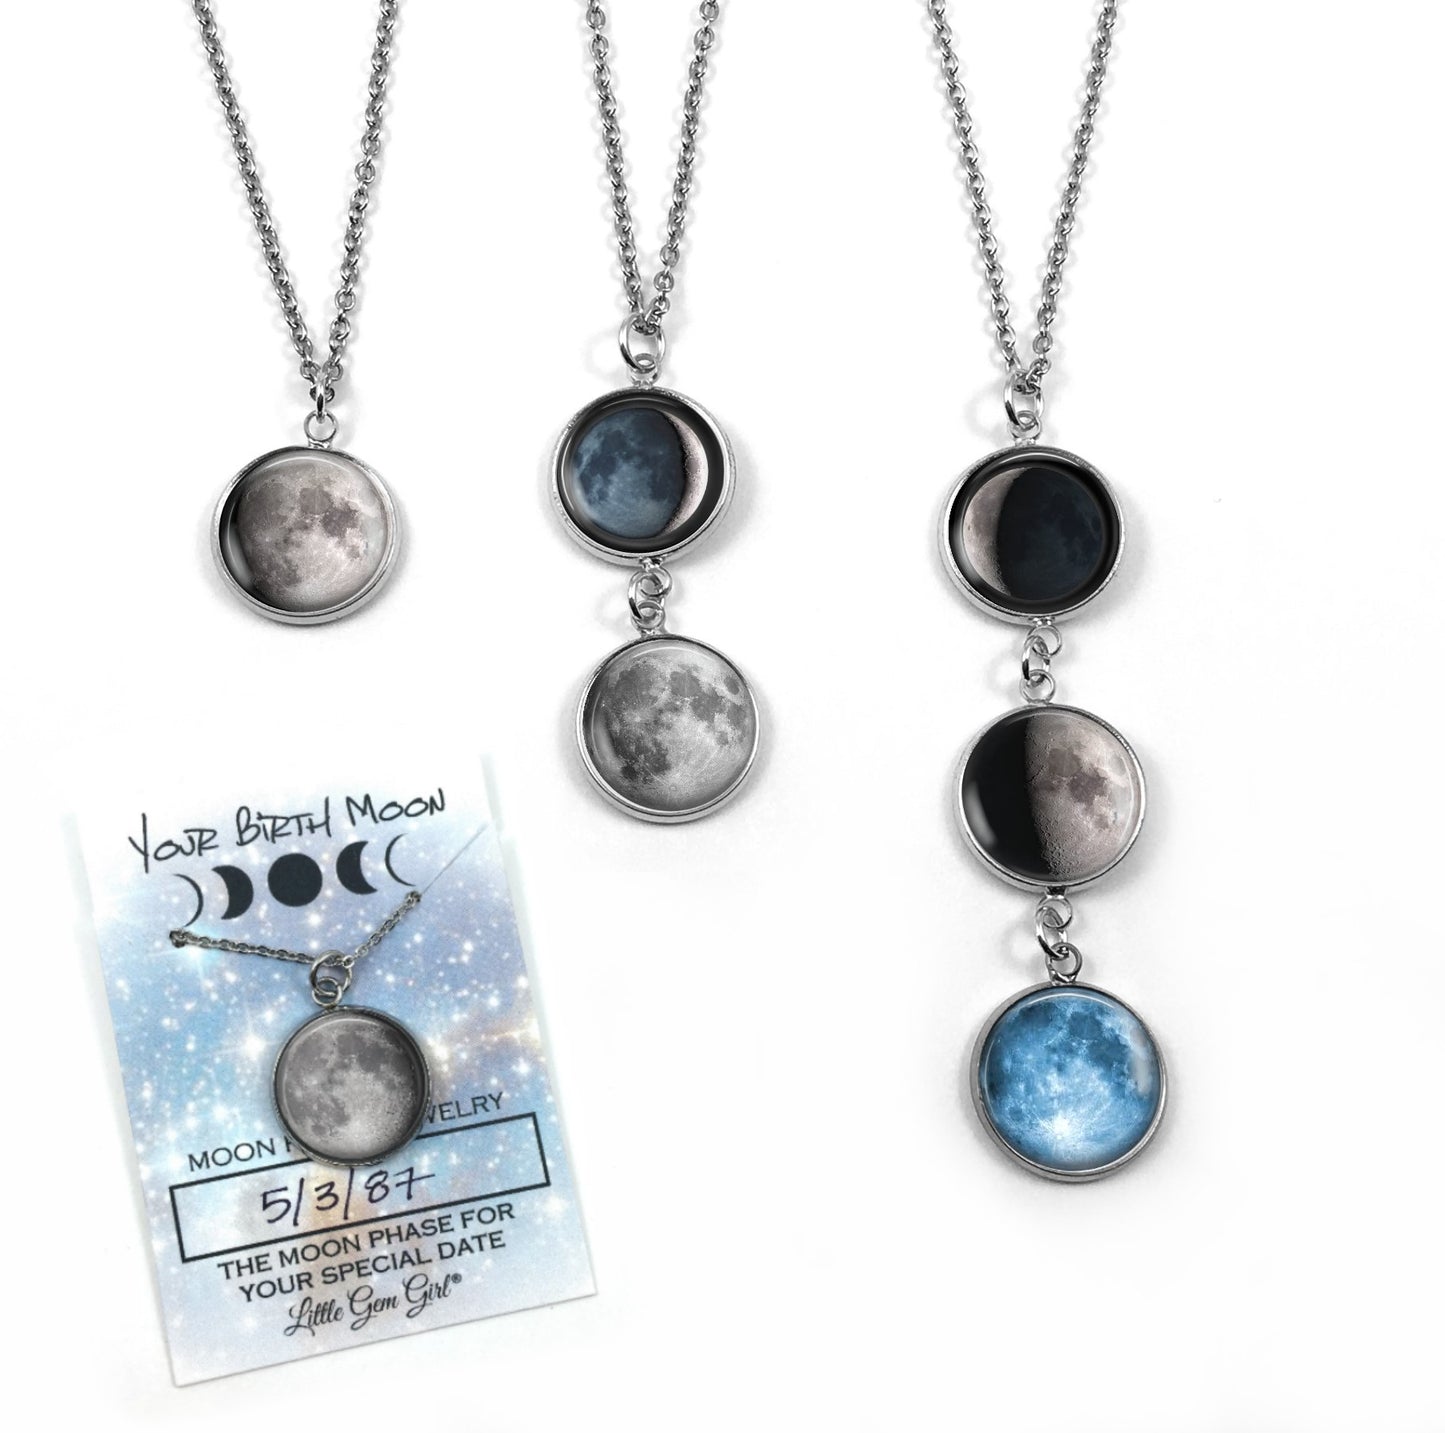 Glowing Stainless Steel Custom Birth Moon Necklace with Optional Engraving - 1 to 4 Moon Phase Pendants